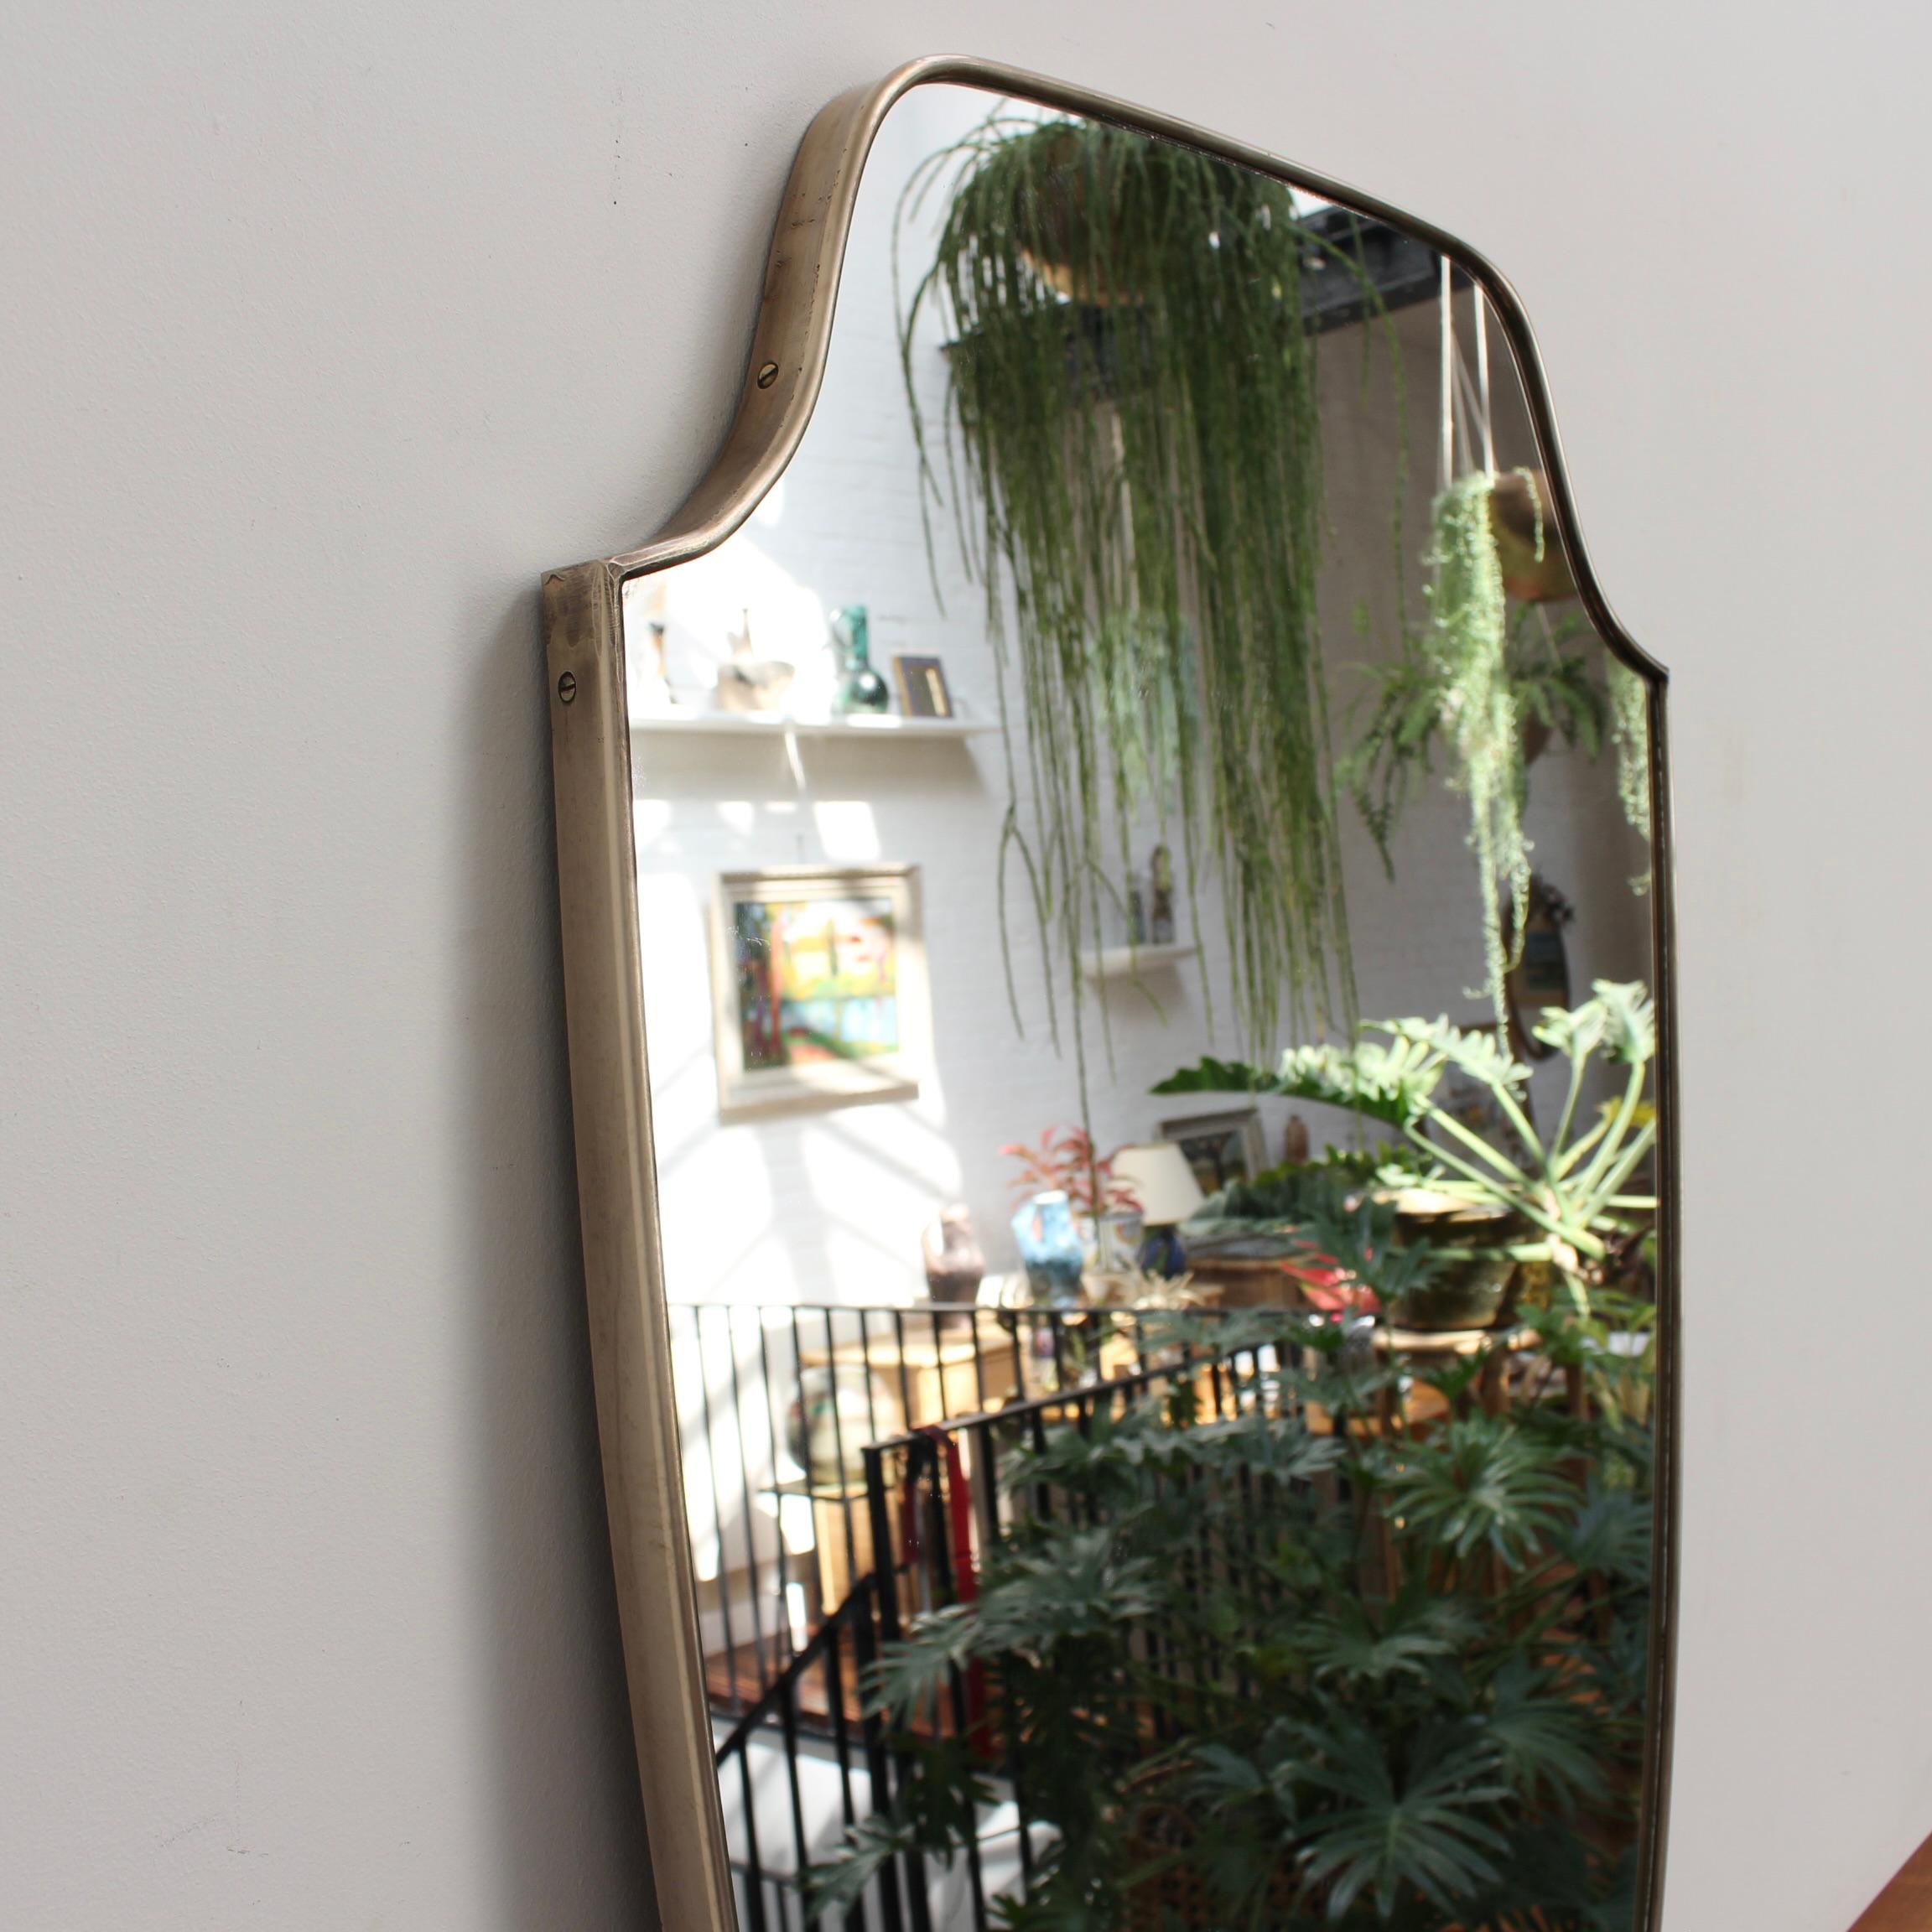 Mid-20th Century Vintage Italian Wall Mirror with Brass Frame, 'circa 1950s', Large